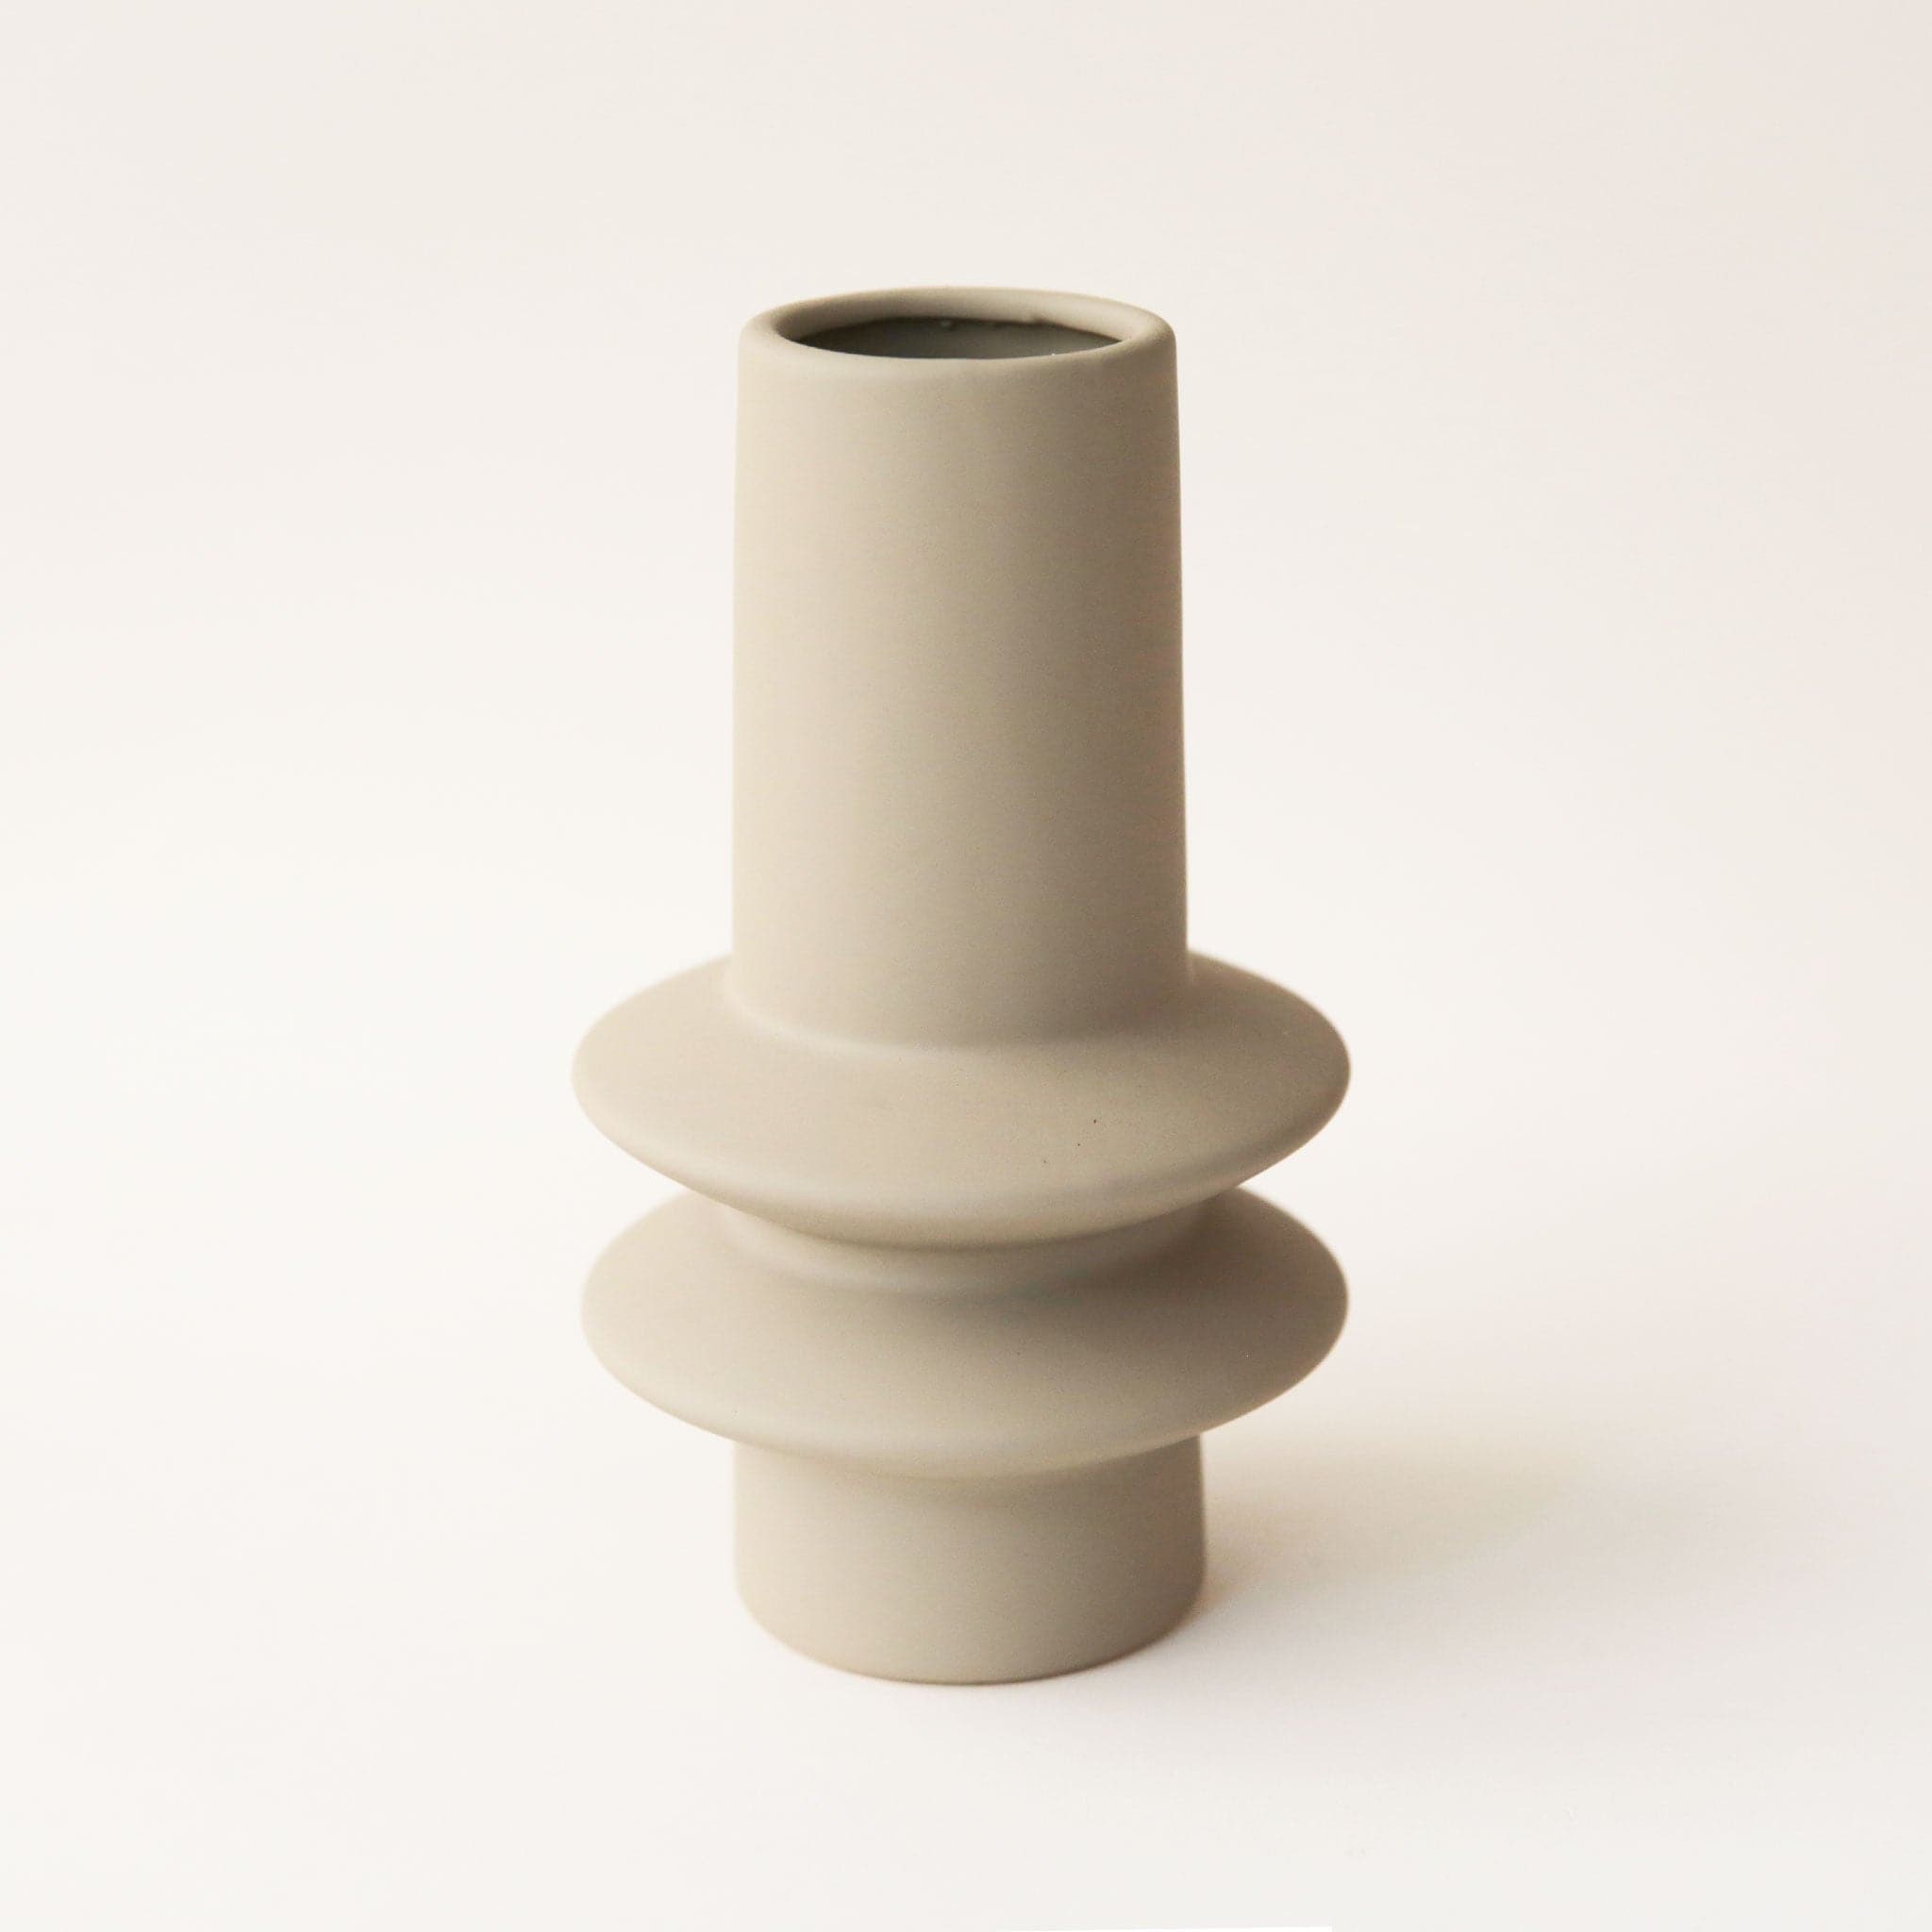 A thin ceramic vase in a beige shade with two saucer like shapes toward the bottom half of the vase along.